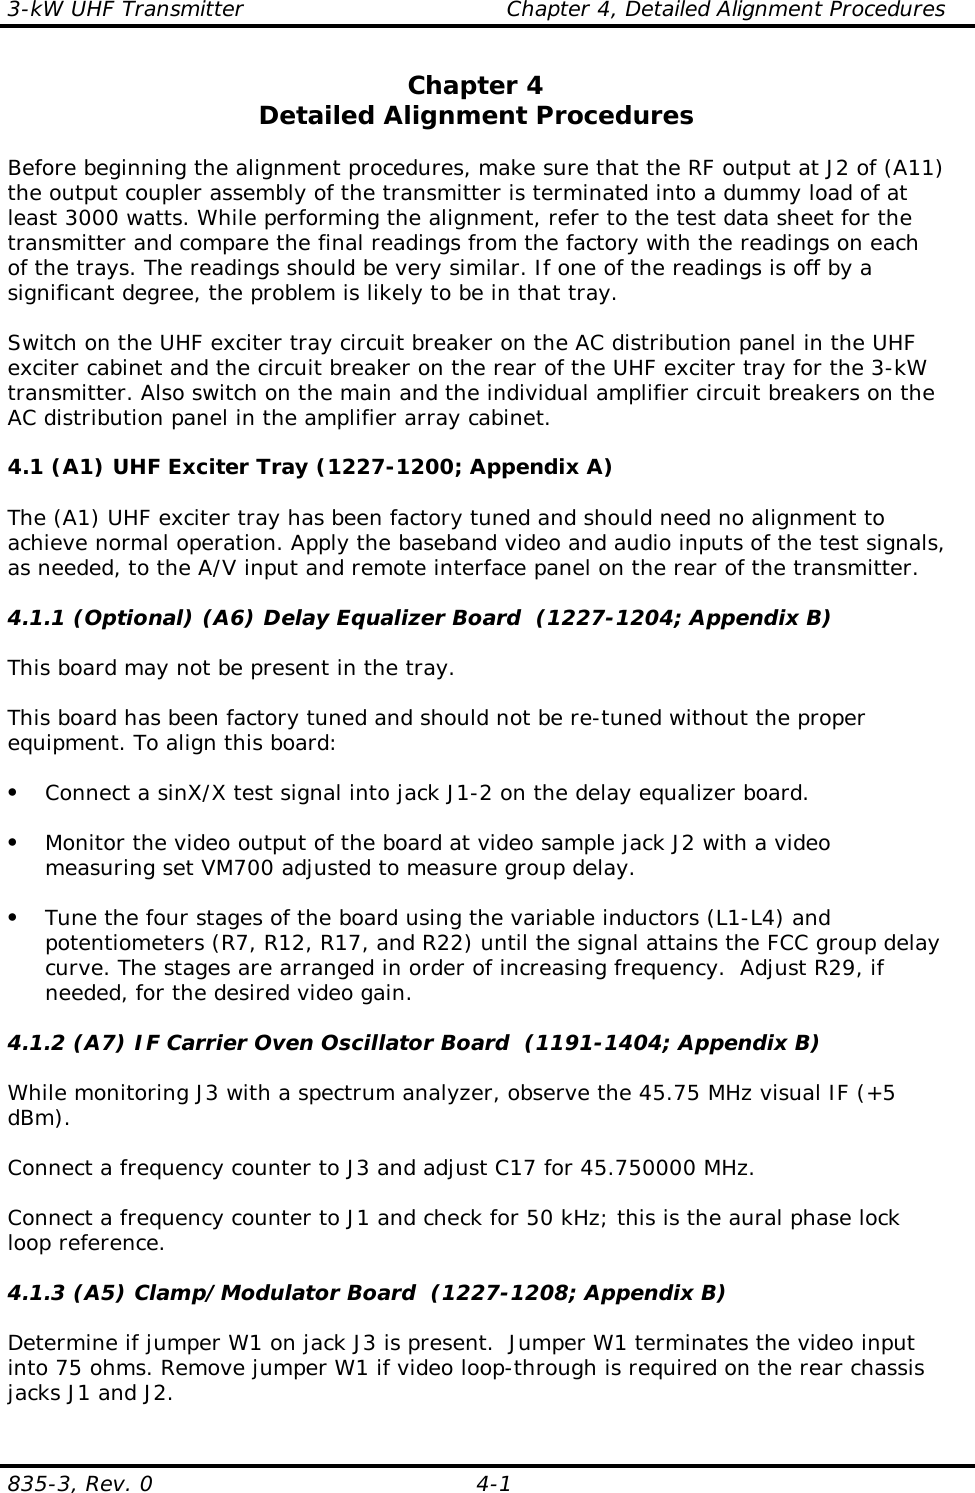 3-kW UHF Transmitter                                    Chapter 4, Detailed Alignment Procedures835-3, Rev. 0 4-1Chapter 4Detailed Alignment ProceduresBefore beginning the alignment procedures, make sure that the RF output at J2 of (A11)the output coupler assembly of the transmitter is terminated into a dummy load of atleast 3000 watts. While performing the alignment, refer to the test data sheet for thetransmitter and compare the final readings from the factory with the readings on eachof the trays. The readings should be very similar. If one of the readings is off by asignificant degree, the problem is likely to be in that tray.Switch on the UHF exciter tray circuit breaker on the AC distribution panel in the UHFexciter cabinet and the circuit breaker on the rear of the UHF exciter tray for the 3-kWtransmitter. Also switch on the main and the individual amplifier circuit breakers on theAC distribution panel in the amplifier array cabinet.4.1 (A1) UHF Exciter Tray (1227-1200; Appendix A)The (A1) UHF exciter tray has been factory tuned and should need no alignment toachieve normal operation. Apply the baseband video and audio inputs of the test signals,as needed, to the A/V input and remote interface panel on the rear of the transmitter.  4.1.1 (Optional) (A6) Delay Equalizer Board  (1227-1204; Appendix B)This board may not be present in the tray.This board has been factory tuned and should not be re-tuned without the properequipment. To align this board:• Connect a sinX/X test signal into jack J1-2 on the delay equalizer board.• Monitor the video output of the board at video sample jack J2 with a videomeasuring set VM700 adjusted to measure group delay.• Tune the four stages of the board using the variable inductors (L1-L4) andpotentiometers (R7, R12, R17, and R22) until the signal attains the FCC group delaycurve. The stages are arranged in order of increasing frequency.  Adjust R29, ifneeded, for the desired video gain.4.1.2 (A7) IF Carrier Oven Oscillator Board  (1191-1404; Appendix B)While monitoring J3 with a spectrum analyzer, observe the 45.75 MHz visual IF (+5dBm).Connect a frequency counter to J3 and adjust C17 for 45.750000 MHz.Connect a frequency counter to J1 and check for 50 kHz; this is the aural phase lockloop reference.4.1.3 (A5) Clamp/Modulator Board  (1227-1208; Appendix B)Determine if jumper W1 on jack J3 is present.  Jumper W1 terminates the video inputinto 75 ohms. Remove jumper W1 if video loop-through is required on the rear chassisjacks J1 and J2.